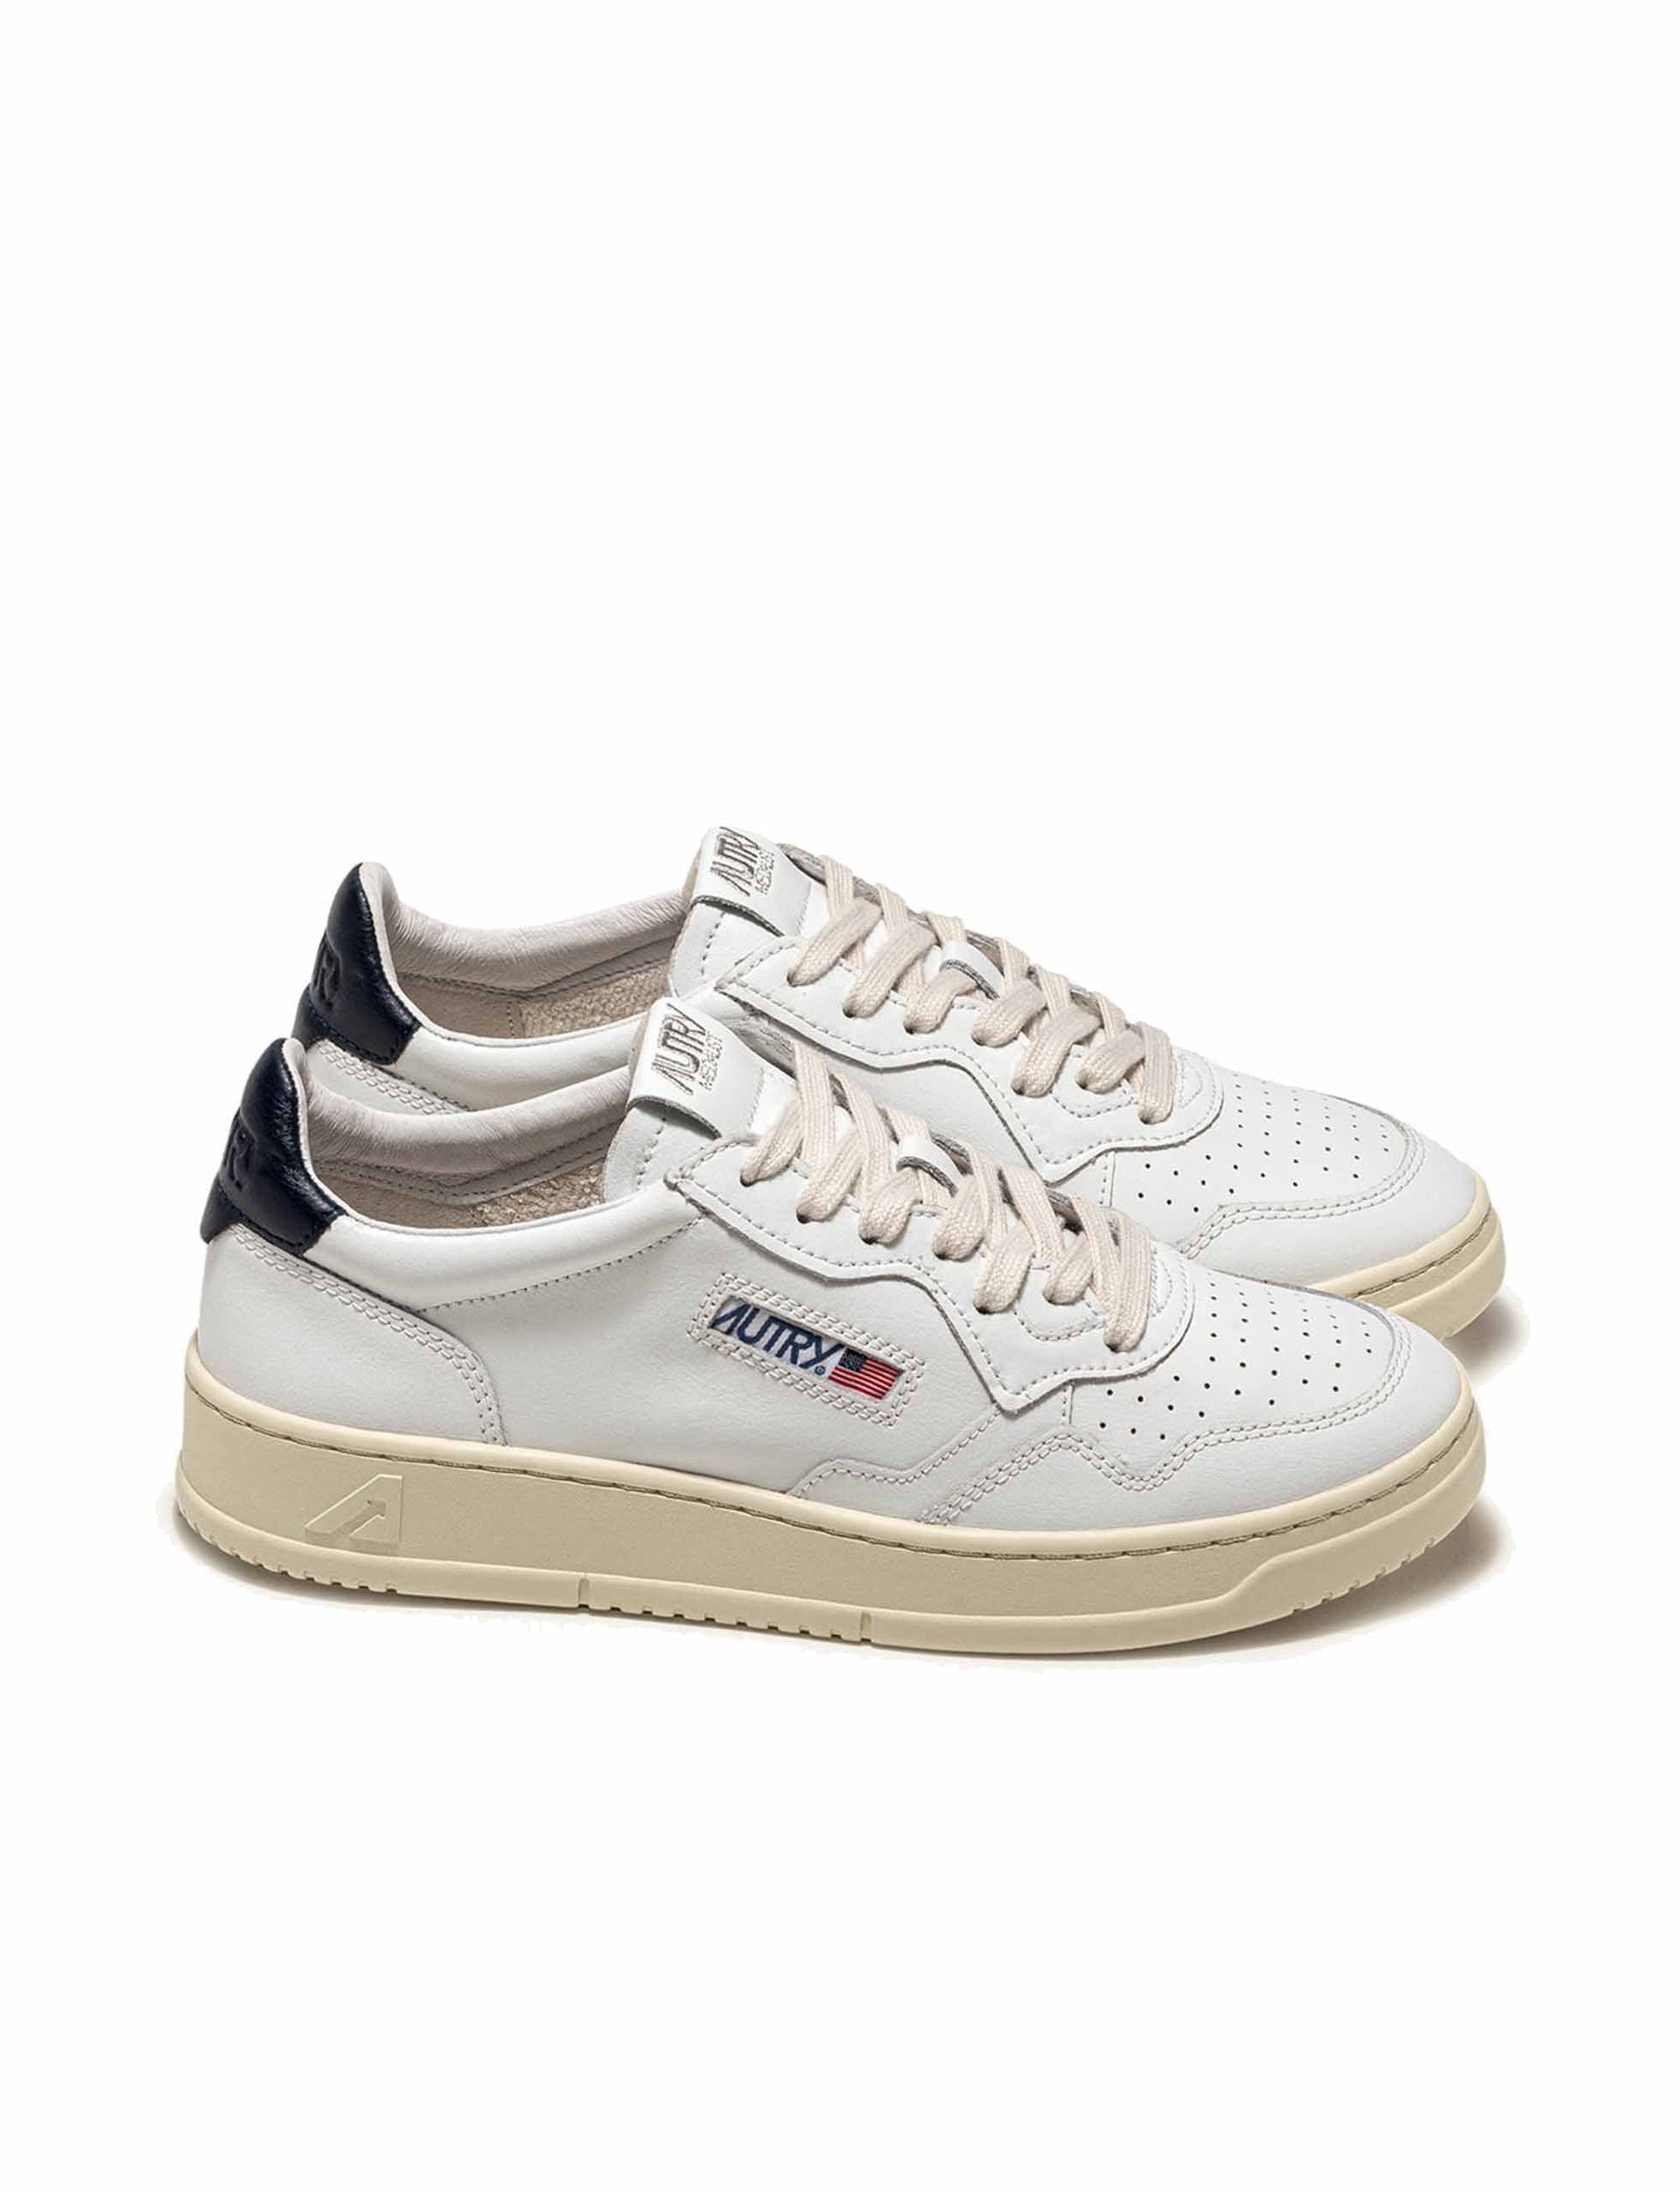 AUTRY SNEAKERS MAN MEDALIST LOW SNEAKERS IN LEATHER COLOR WHITE BLUE